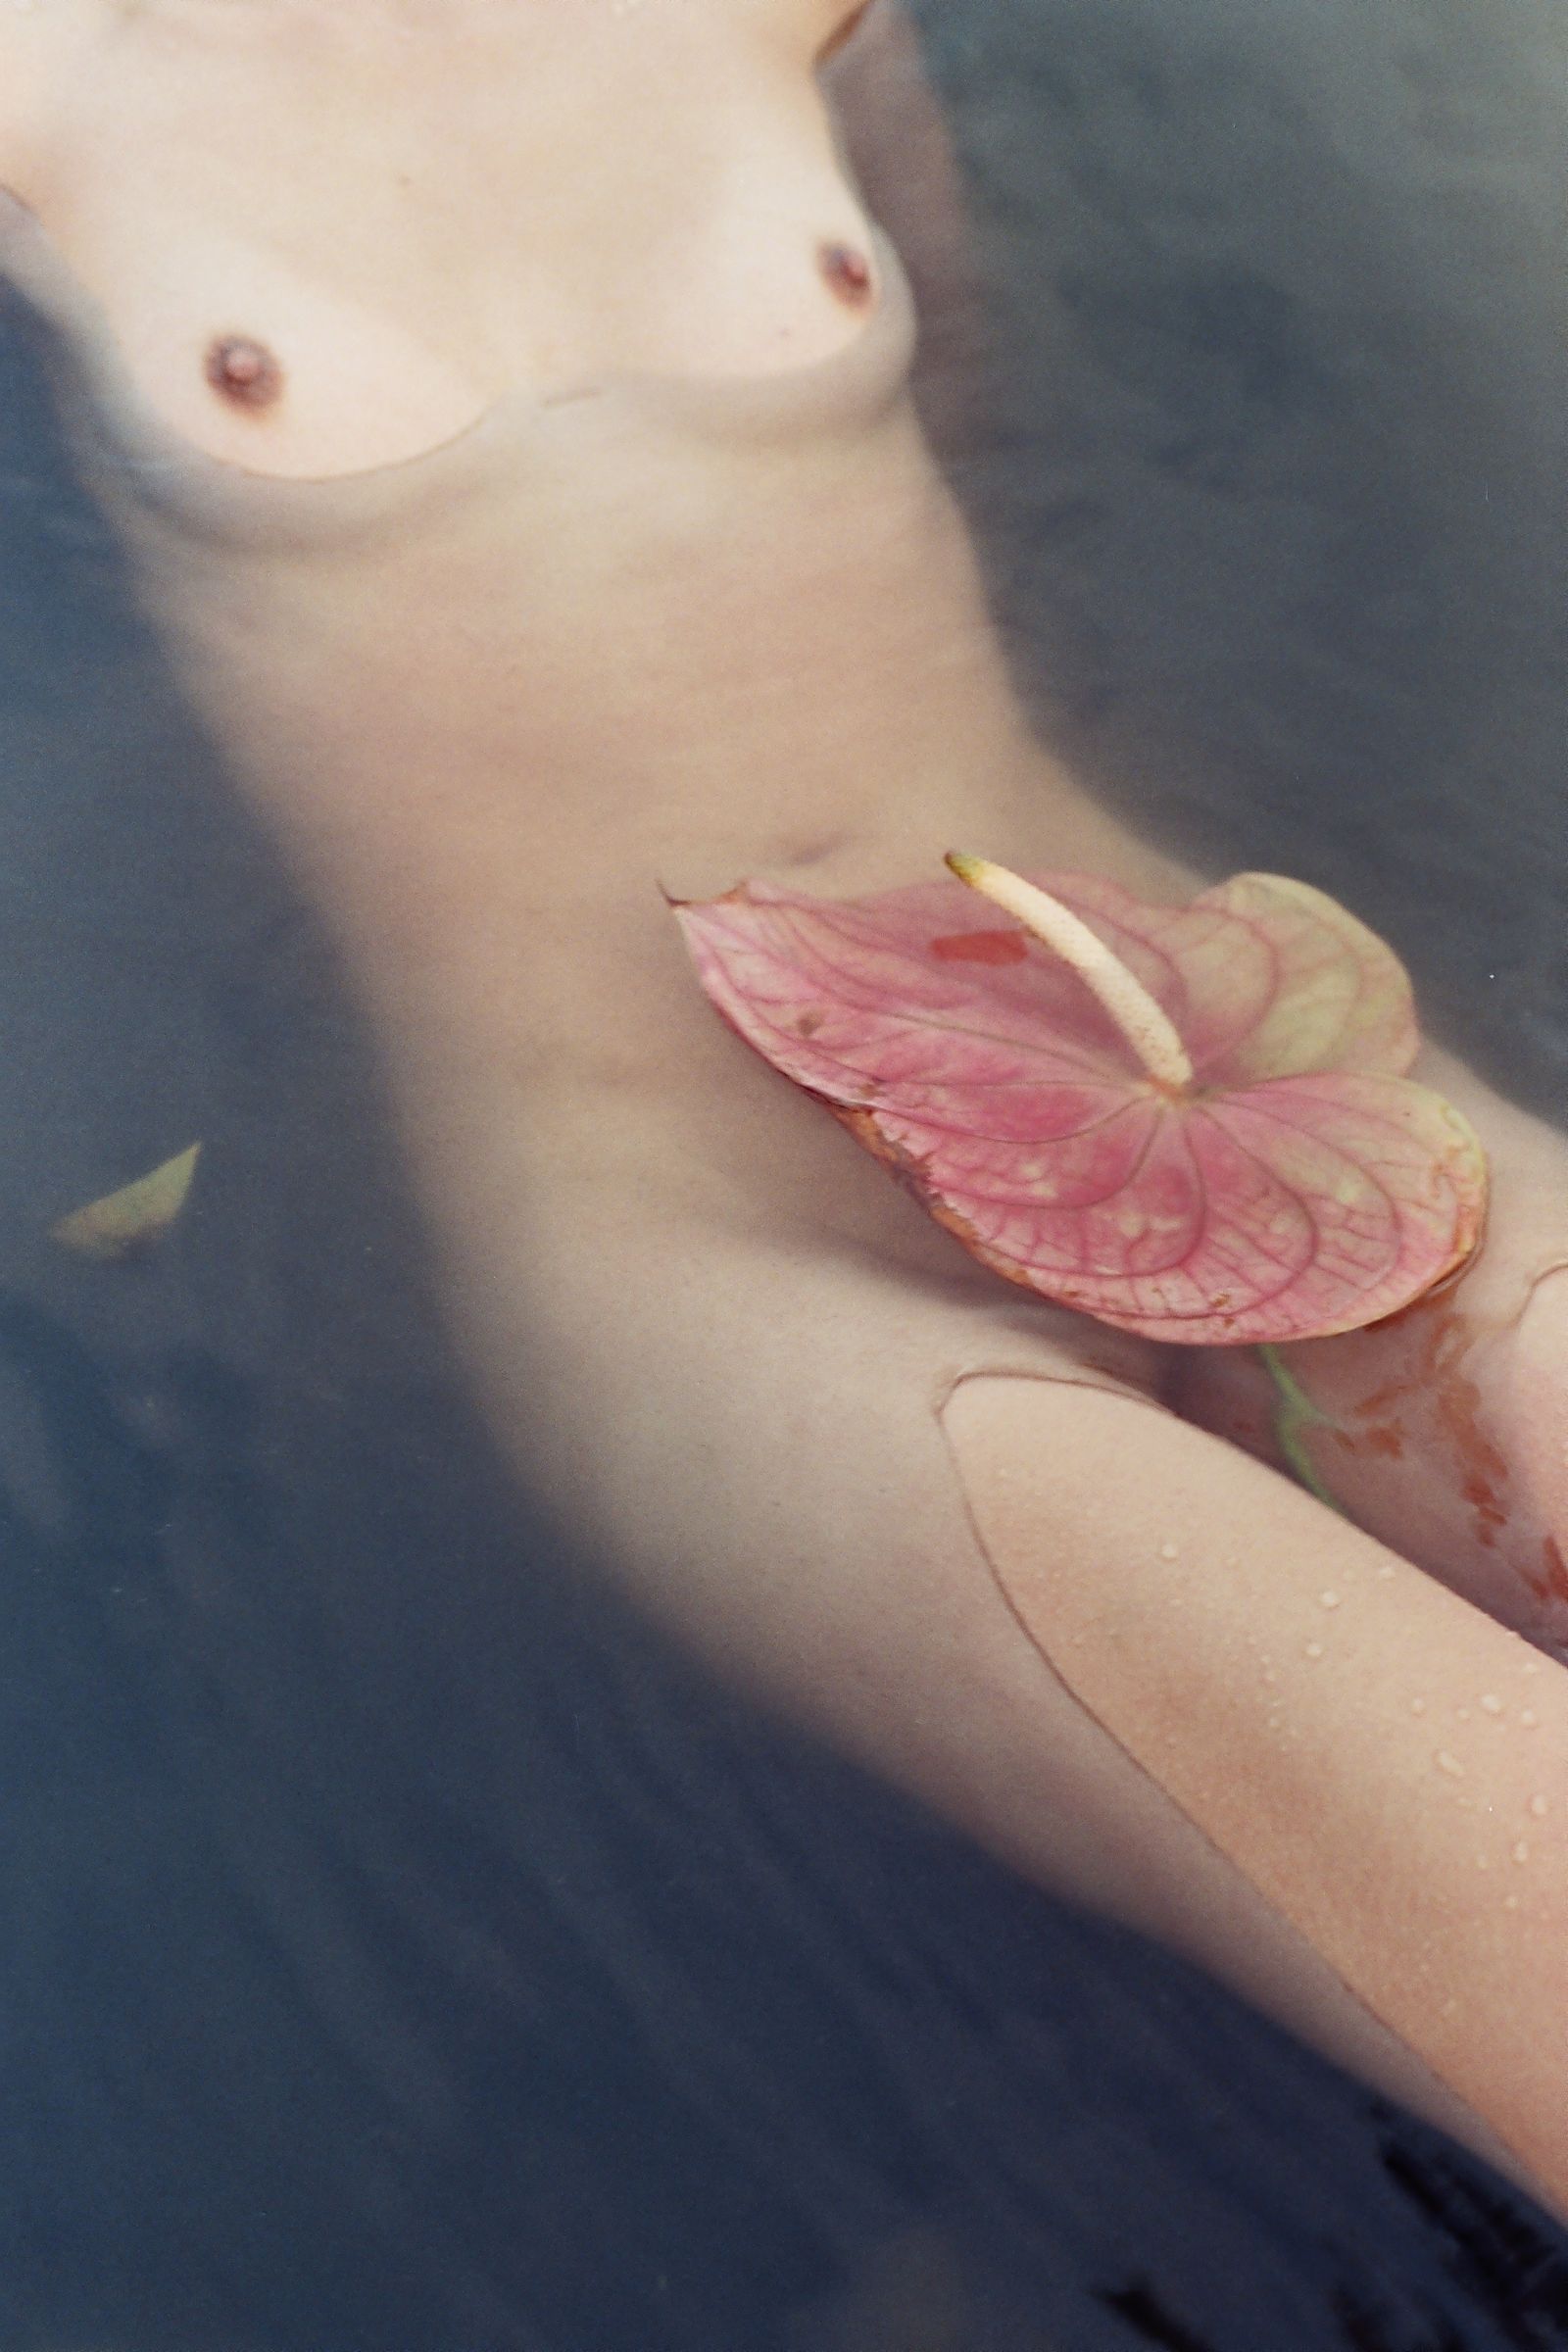 © Denisse Ariana Pérez - Image from the "Agua" photography project